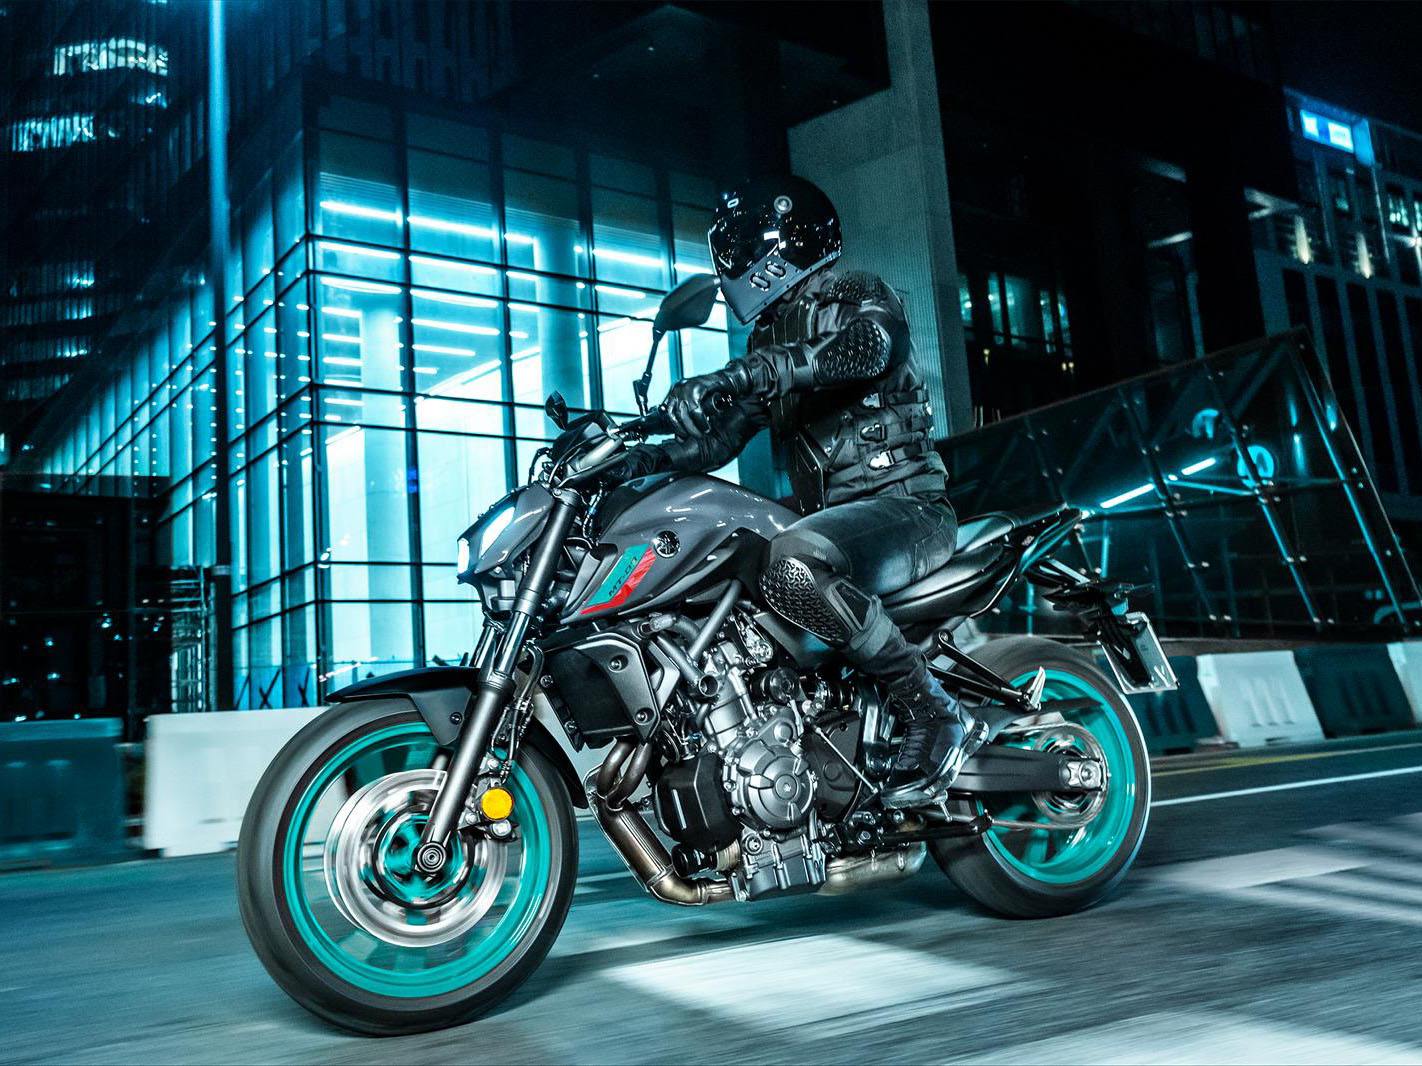 2023 Yamaha MT-07 in Derry, New Hampshire - Photo 6